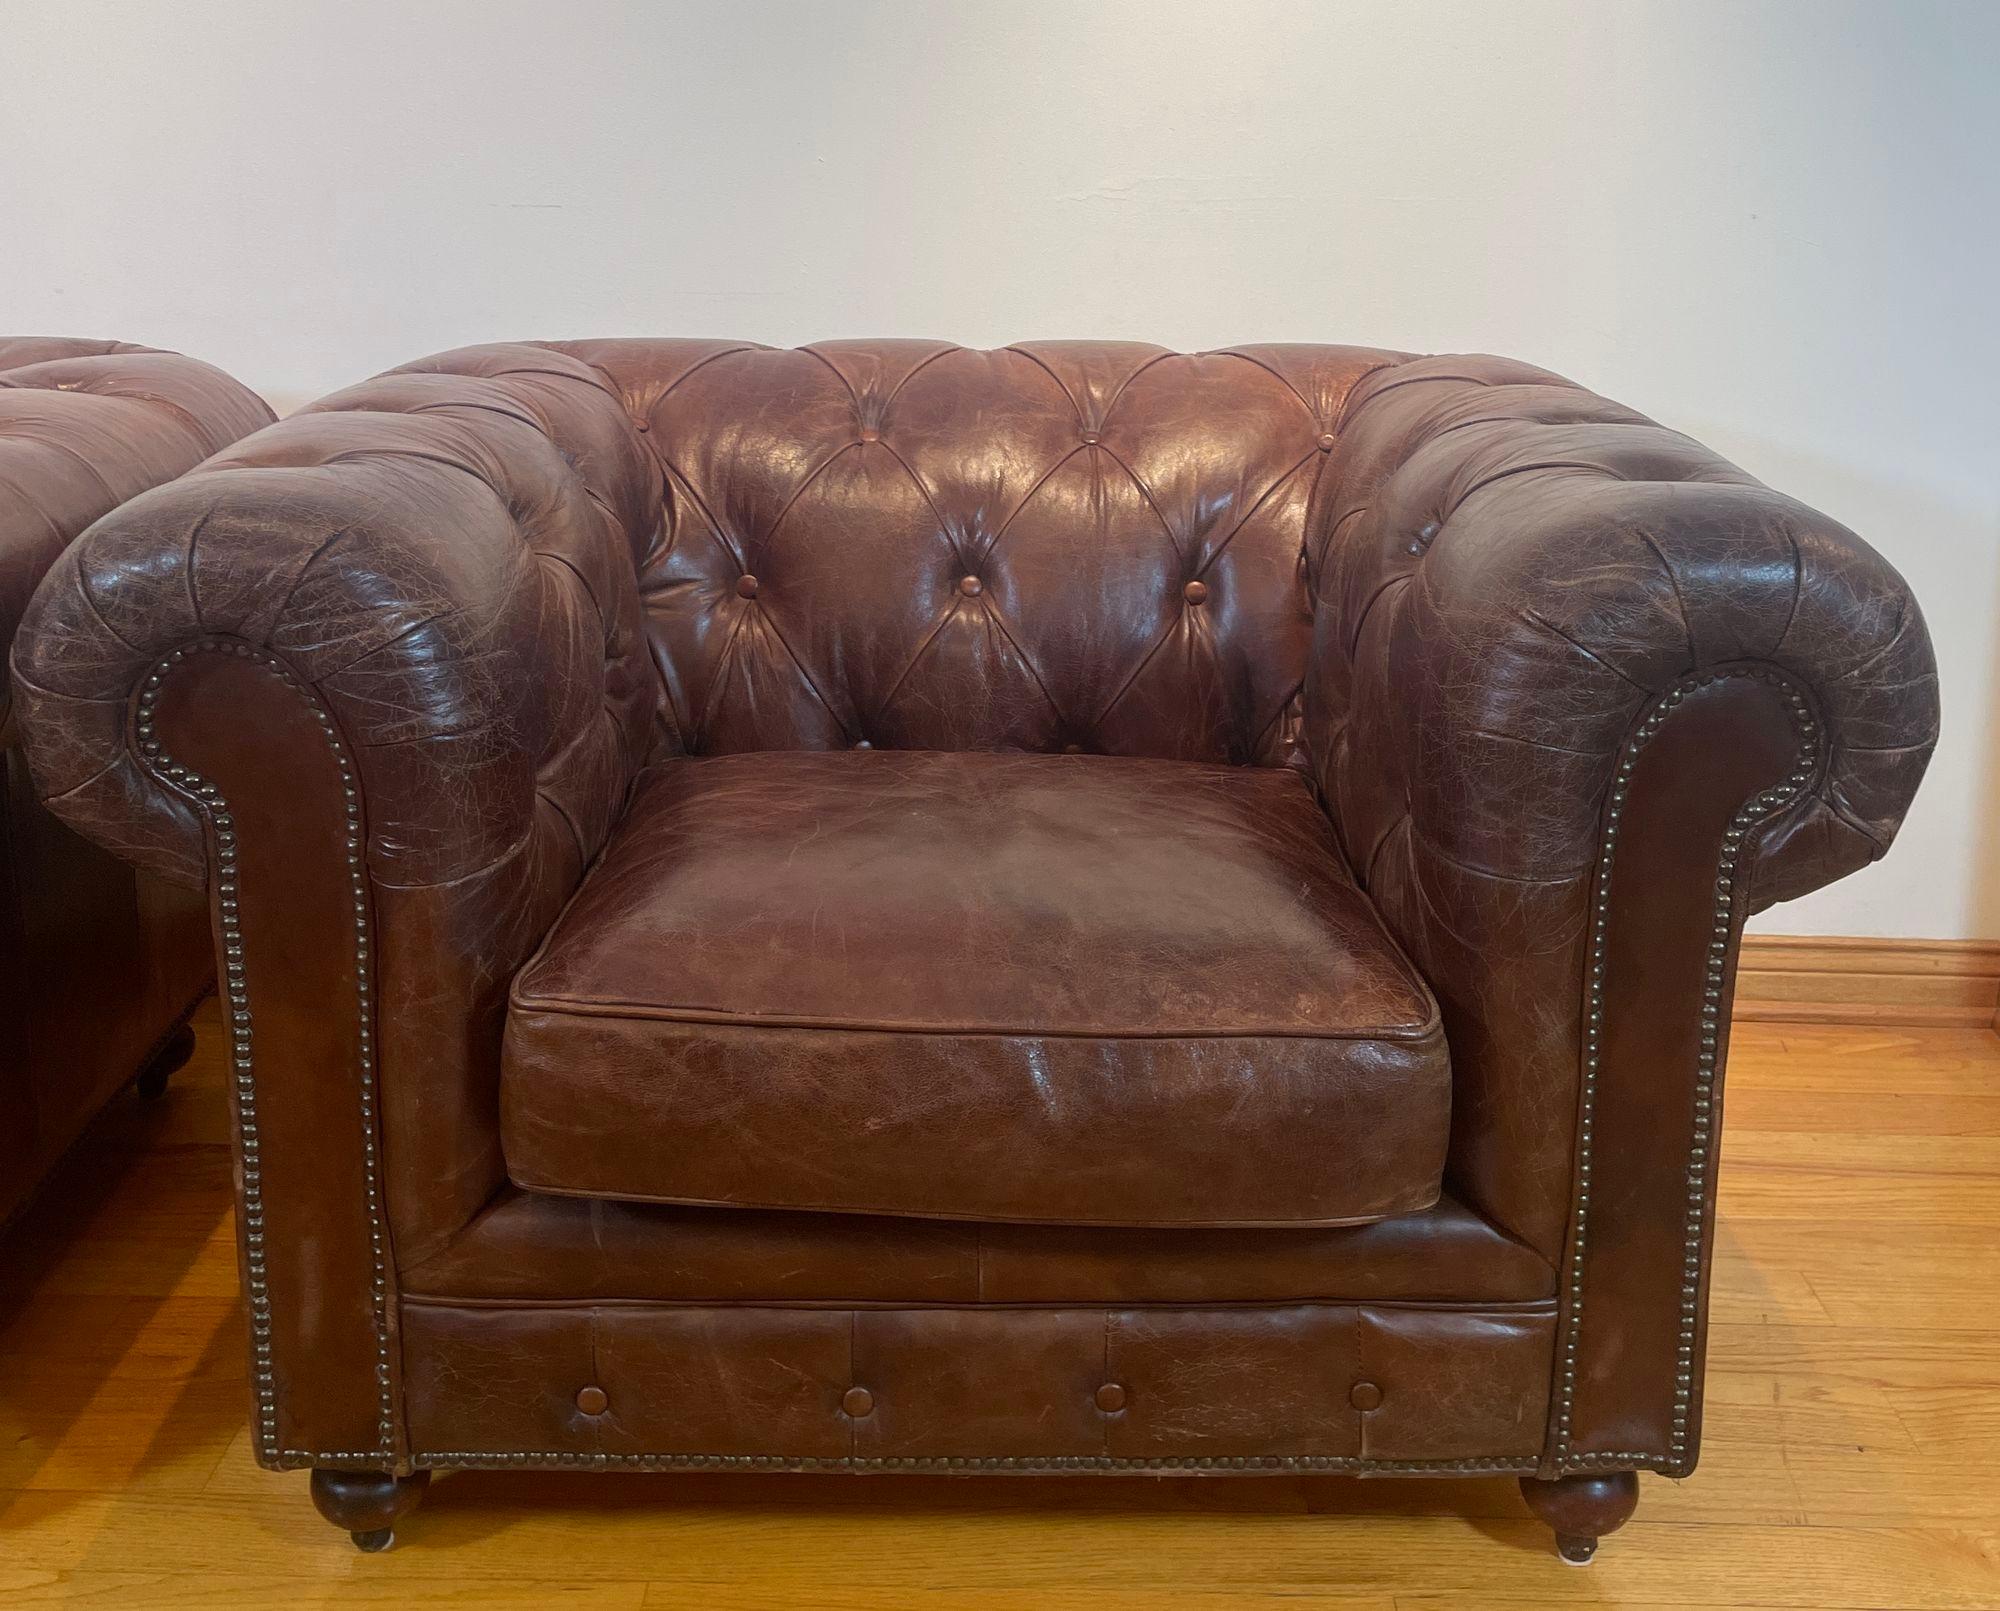 Vintage English Brown Leather tufted Chesterfield Club Armchairs, England circa.
Pair vintage brown english traditional leather chesterfield club arm chairs.
Upholstered in tight button-tufted rich brown leather with nailhead trim, rolled arms and